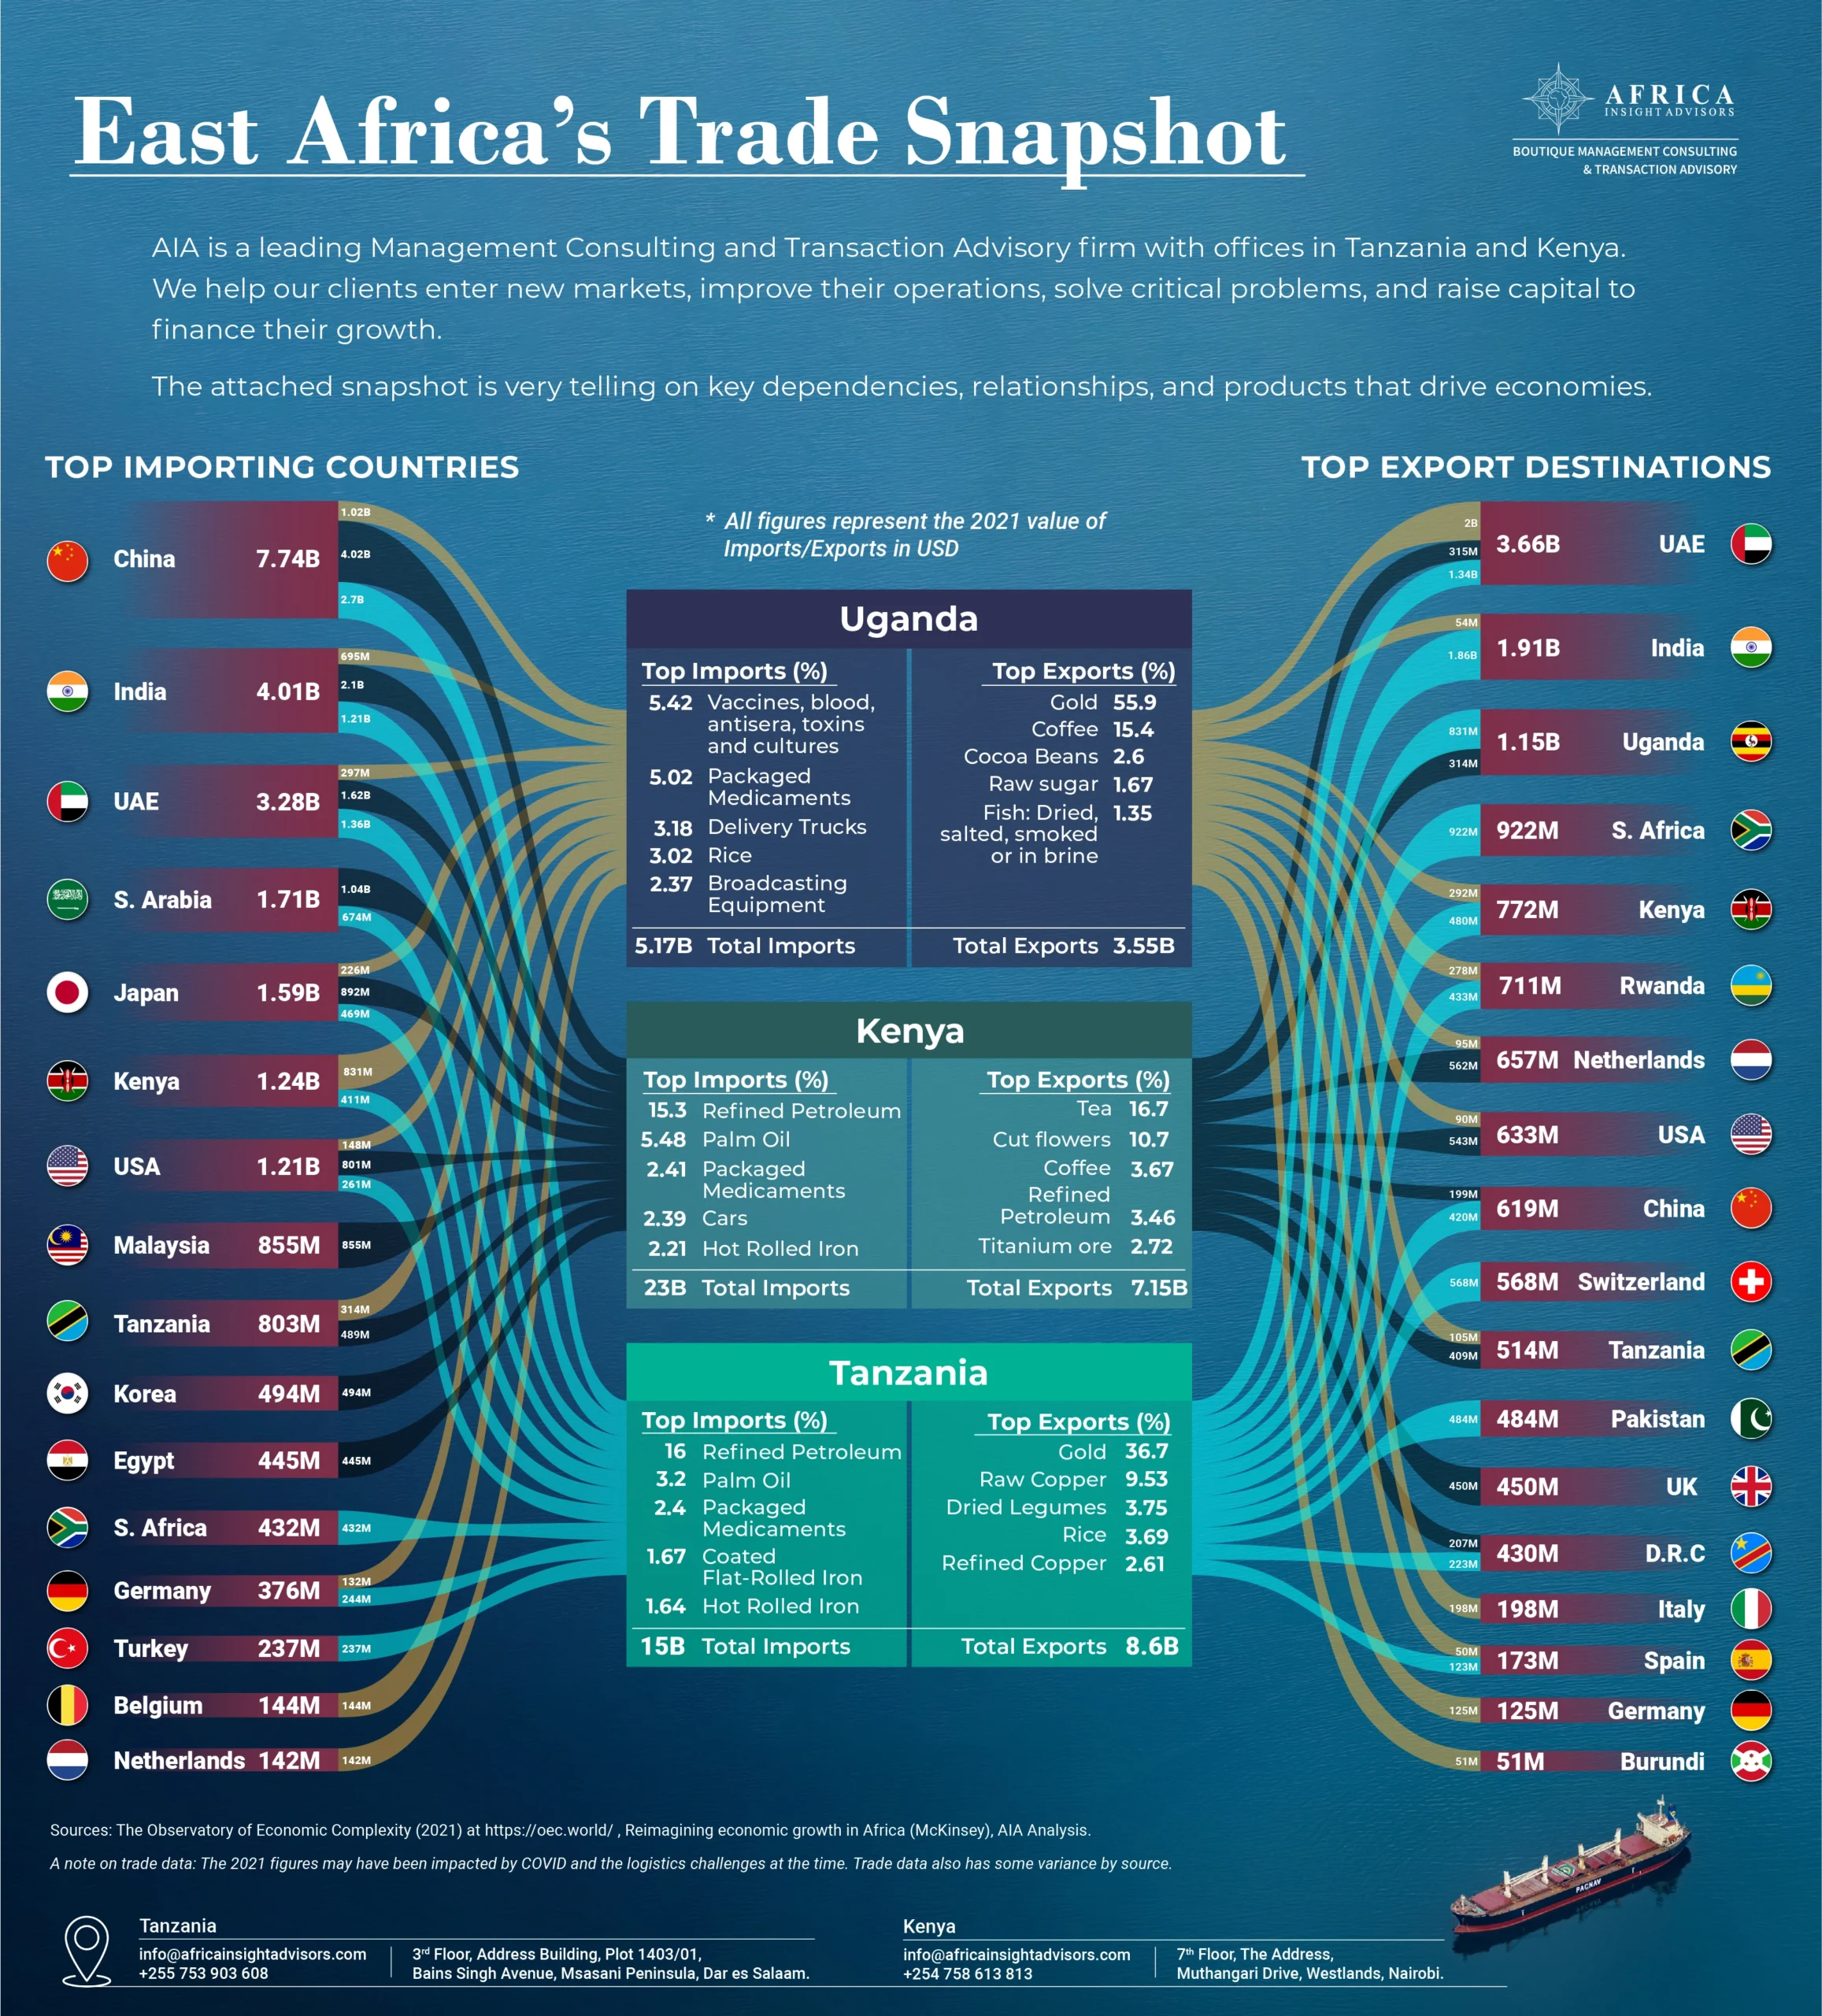 An infographic showing the import and export trade information for Tanzania, Kenya and Uganda among the East African countries